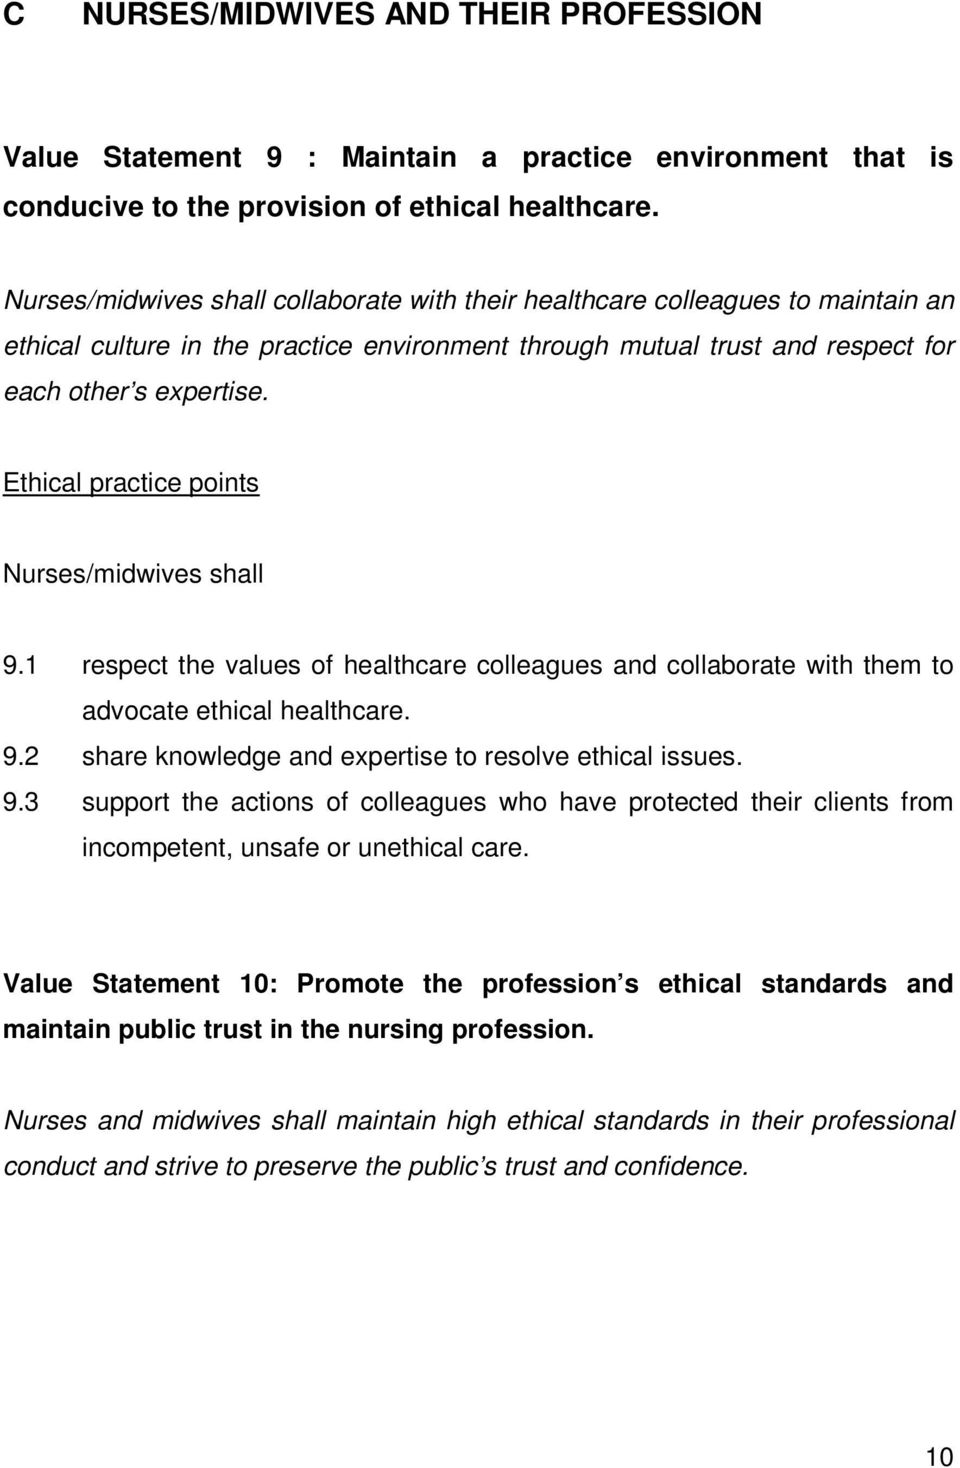 1 respect the values of healthcare colleagues and collaborate with them to advocate ethical healthcare. 9.